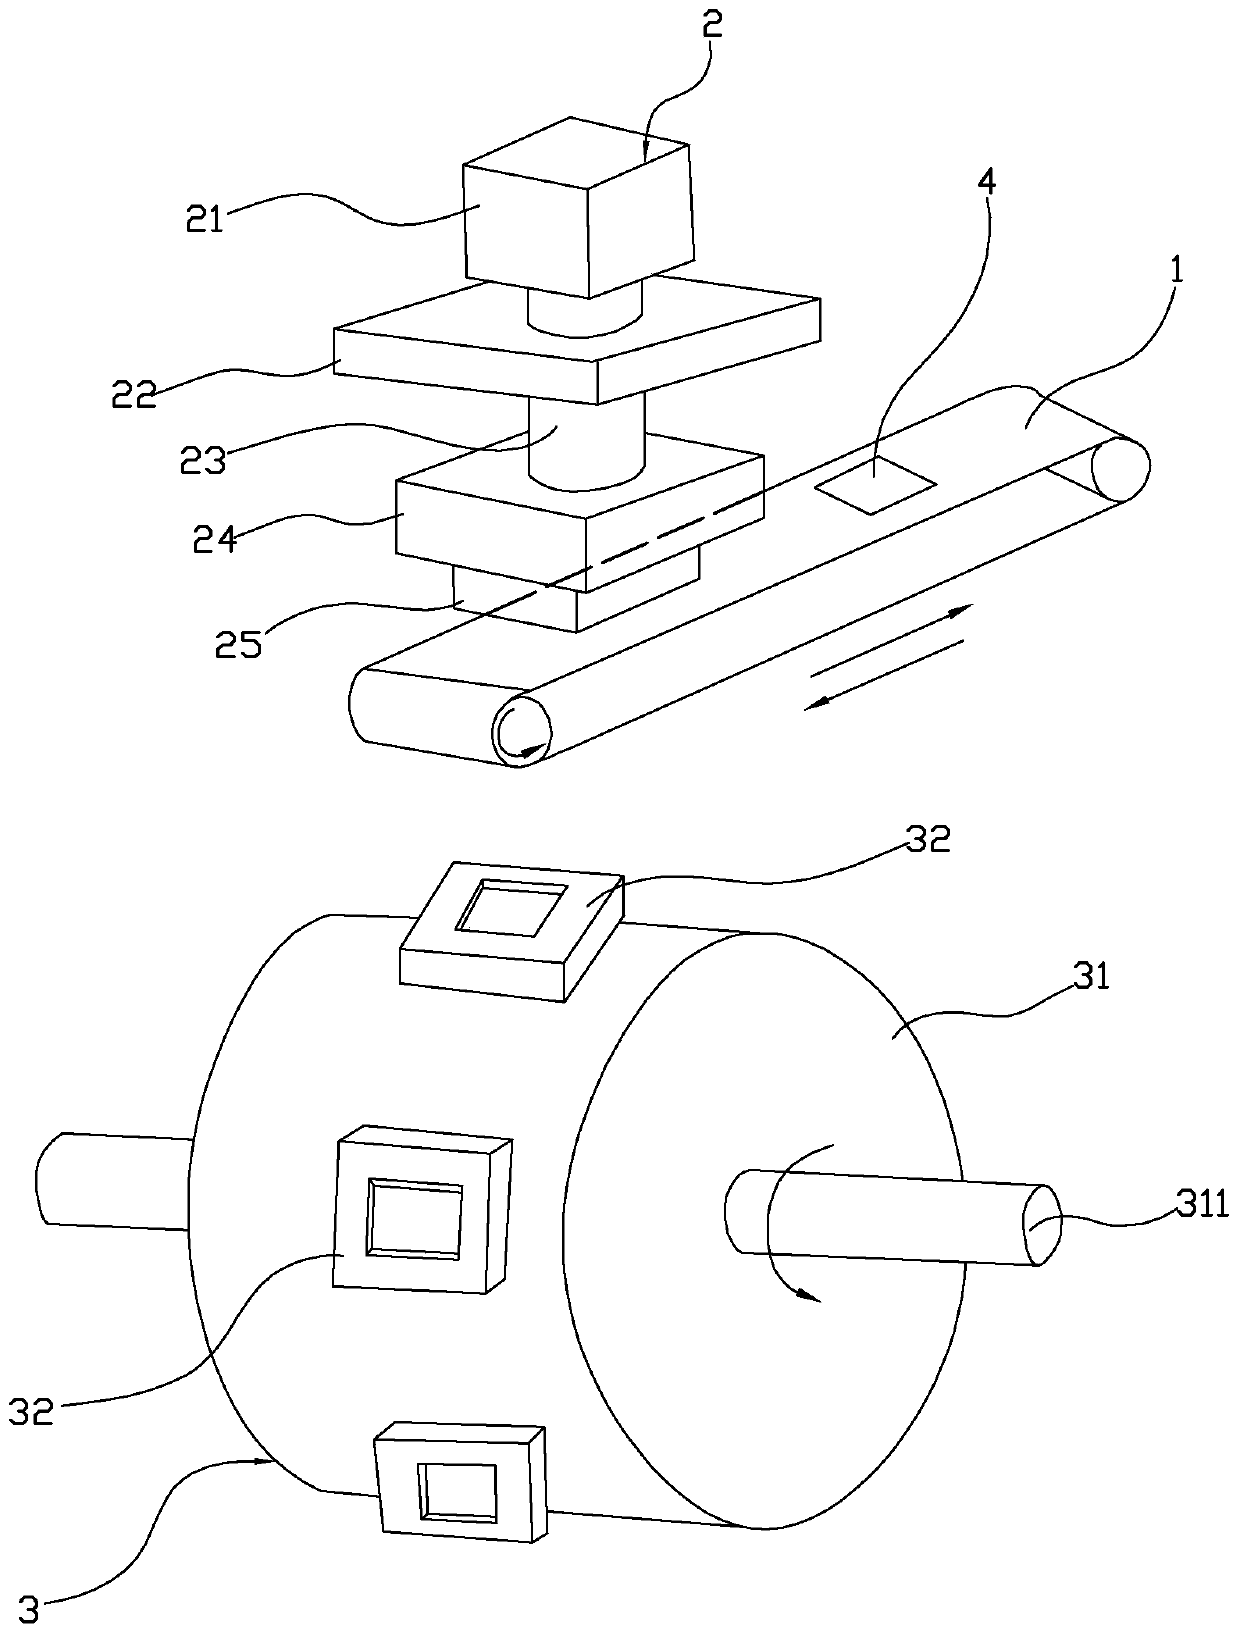 An automatic continuous stamping device